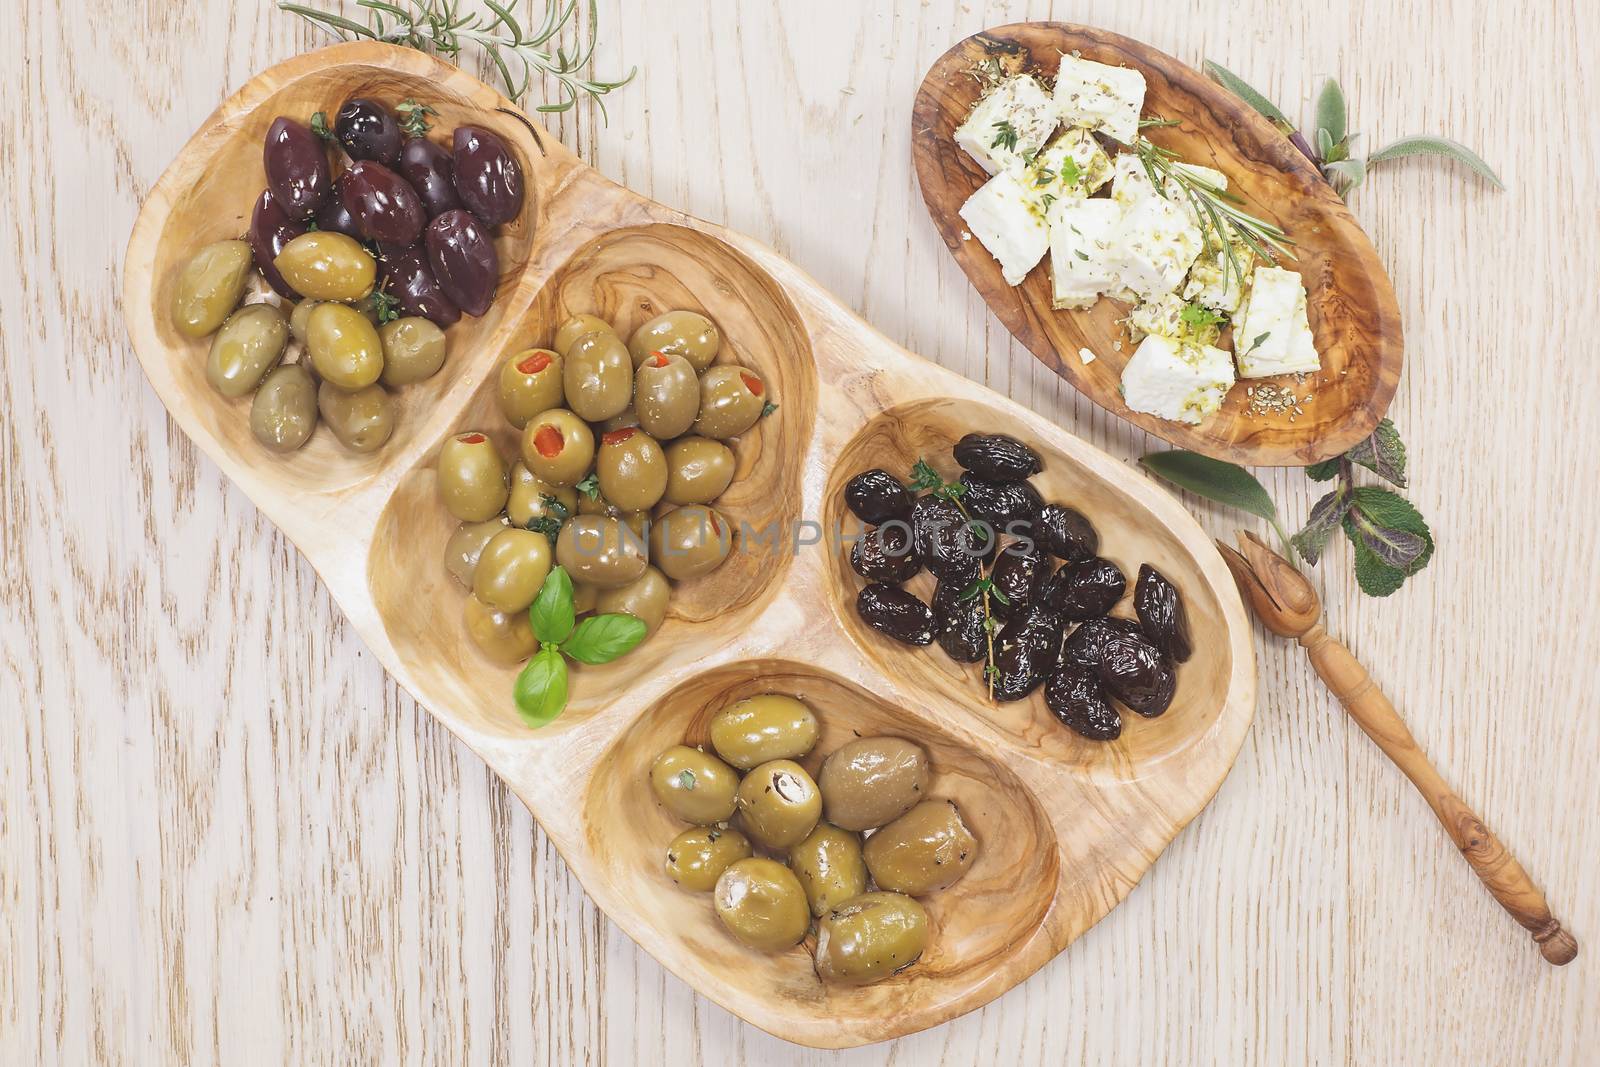 Black and green olives with feta cheese by Slast20